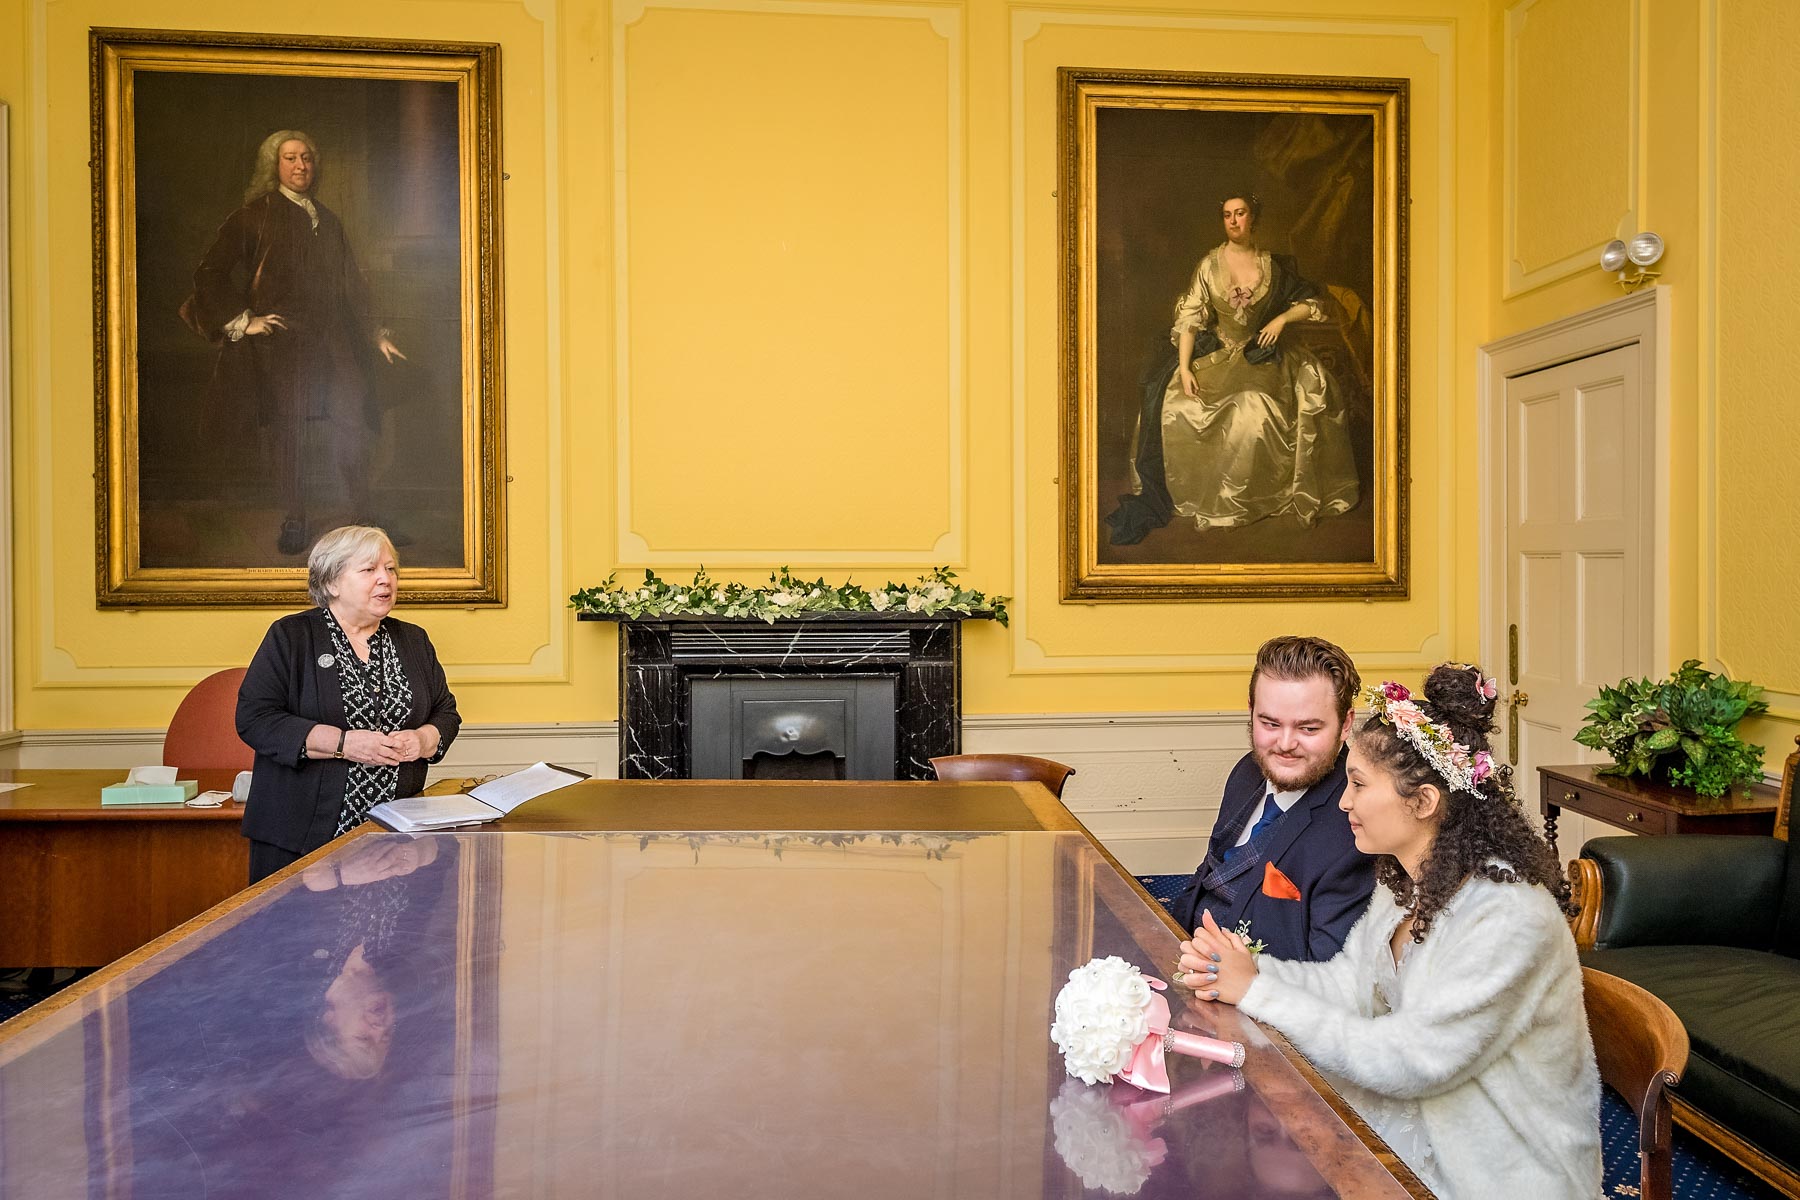 In the new weddings statutory room at Bristol Register Office with long table and portraits, the groom looks at his bride whilst the registrar watches on.